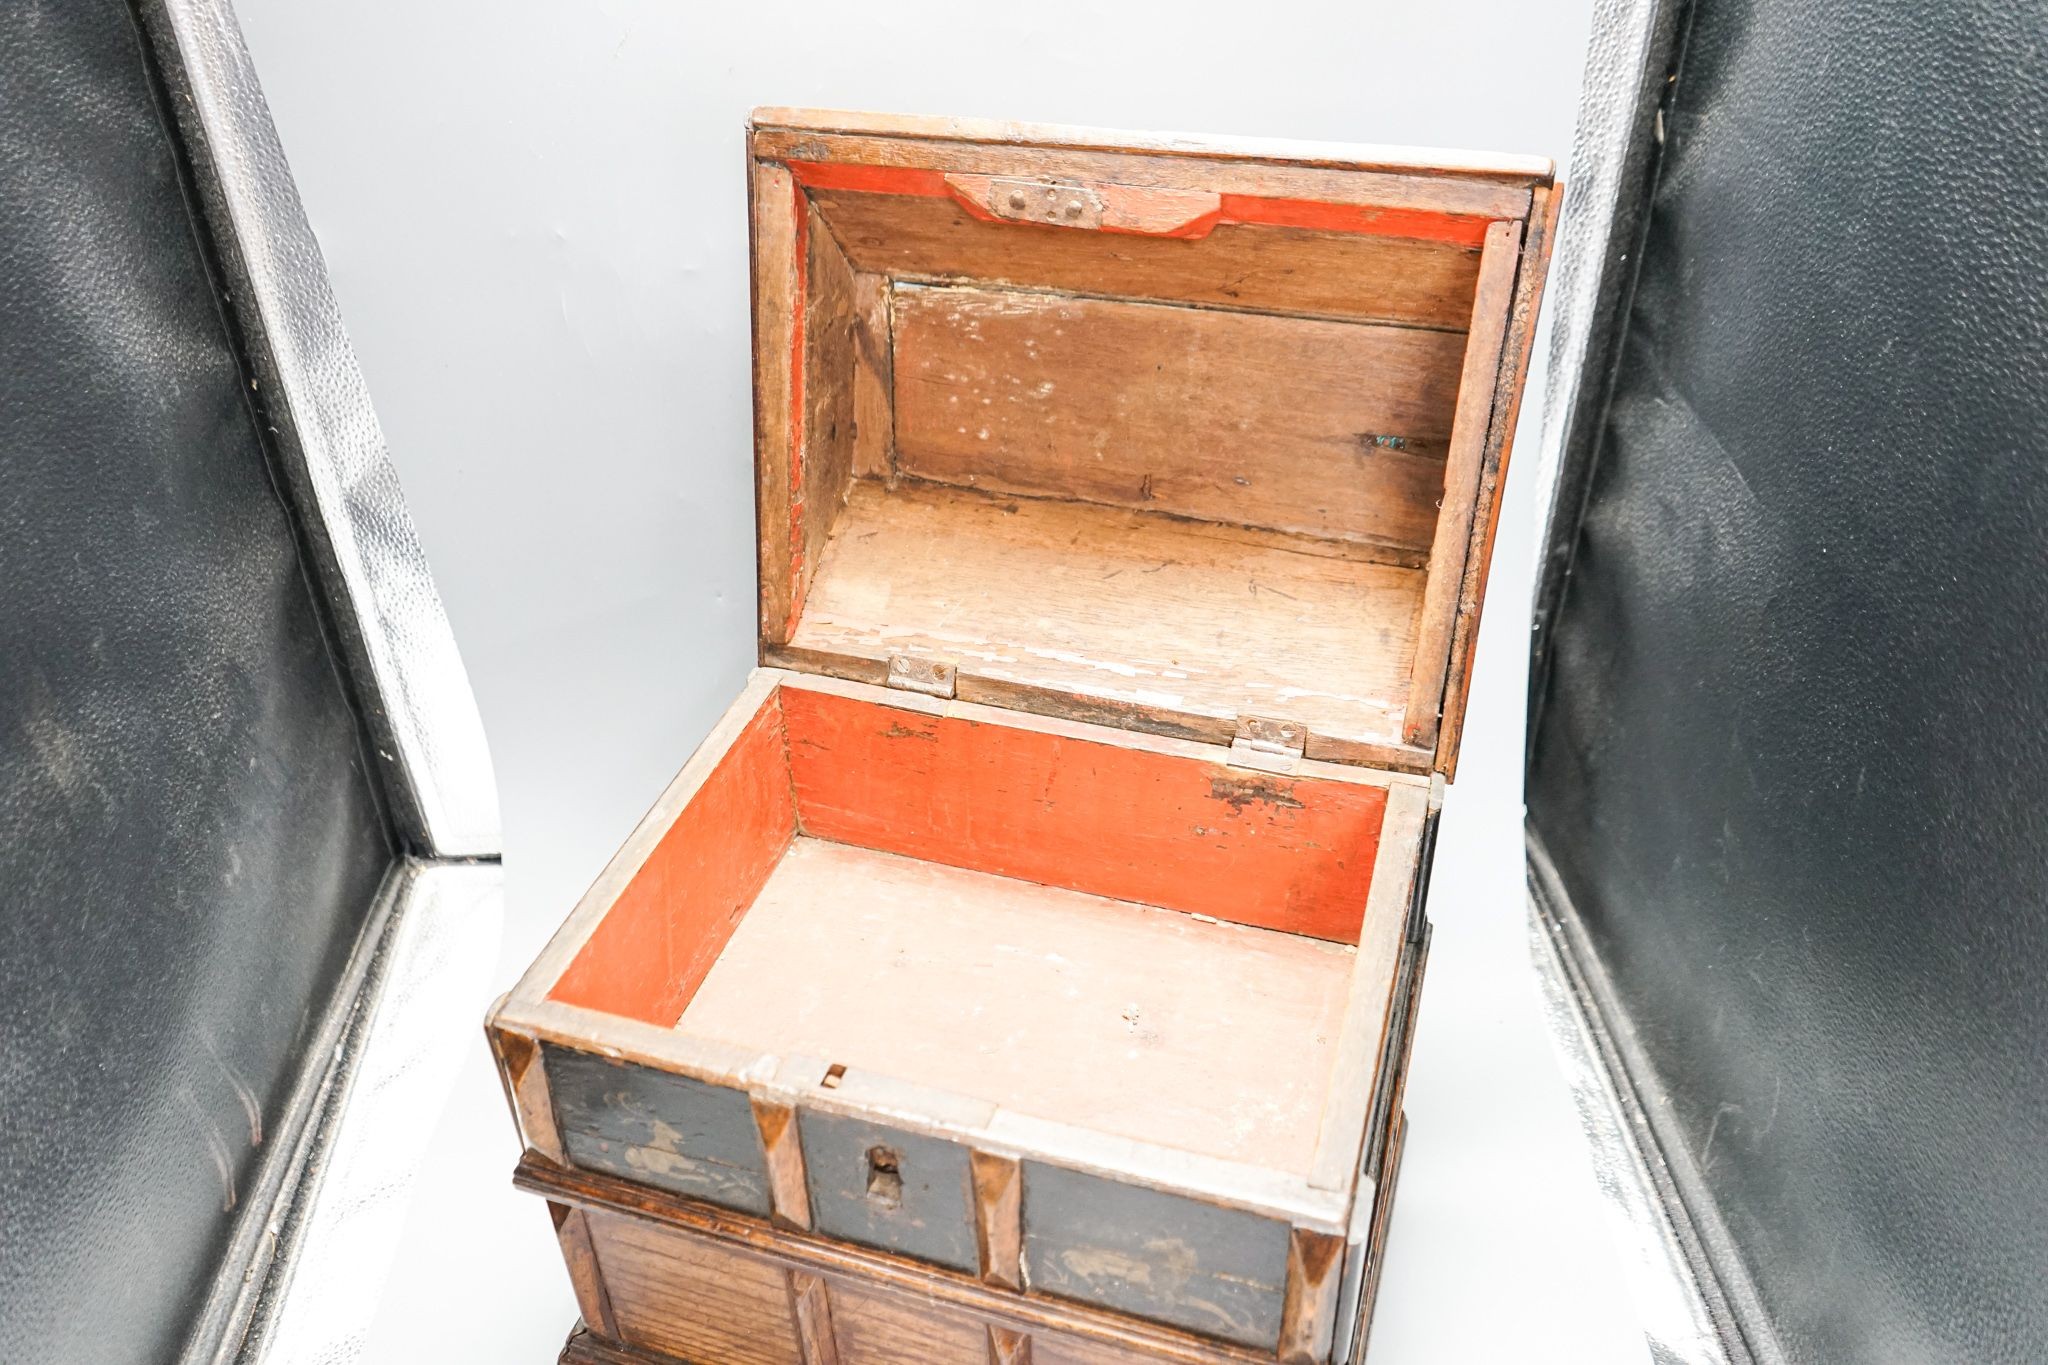 An unusual early 18th century Continental painted chestnut, oak and walnut table-top trunk with concealed drawers 38cm